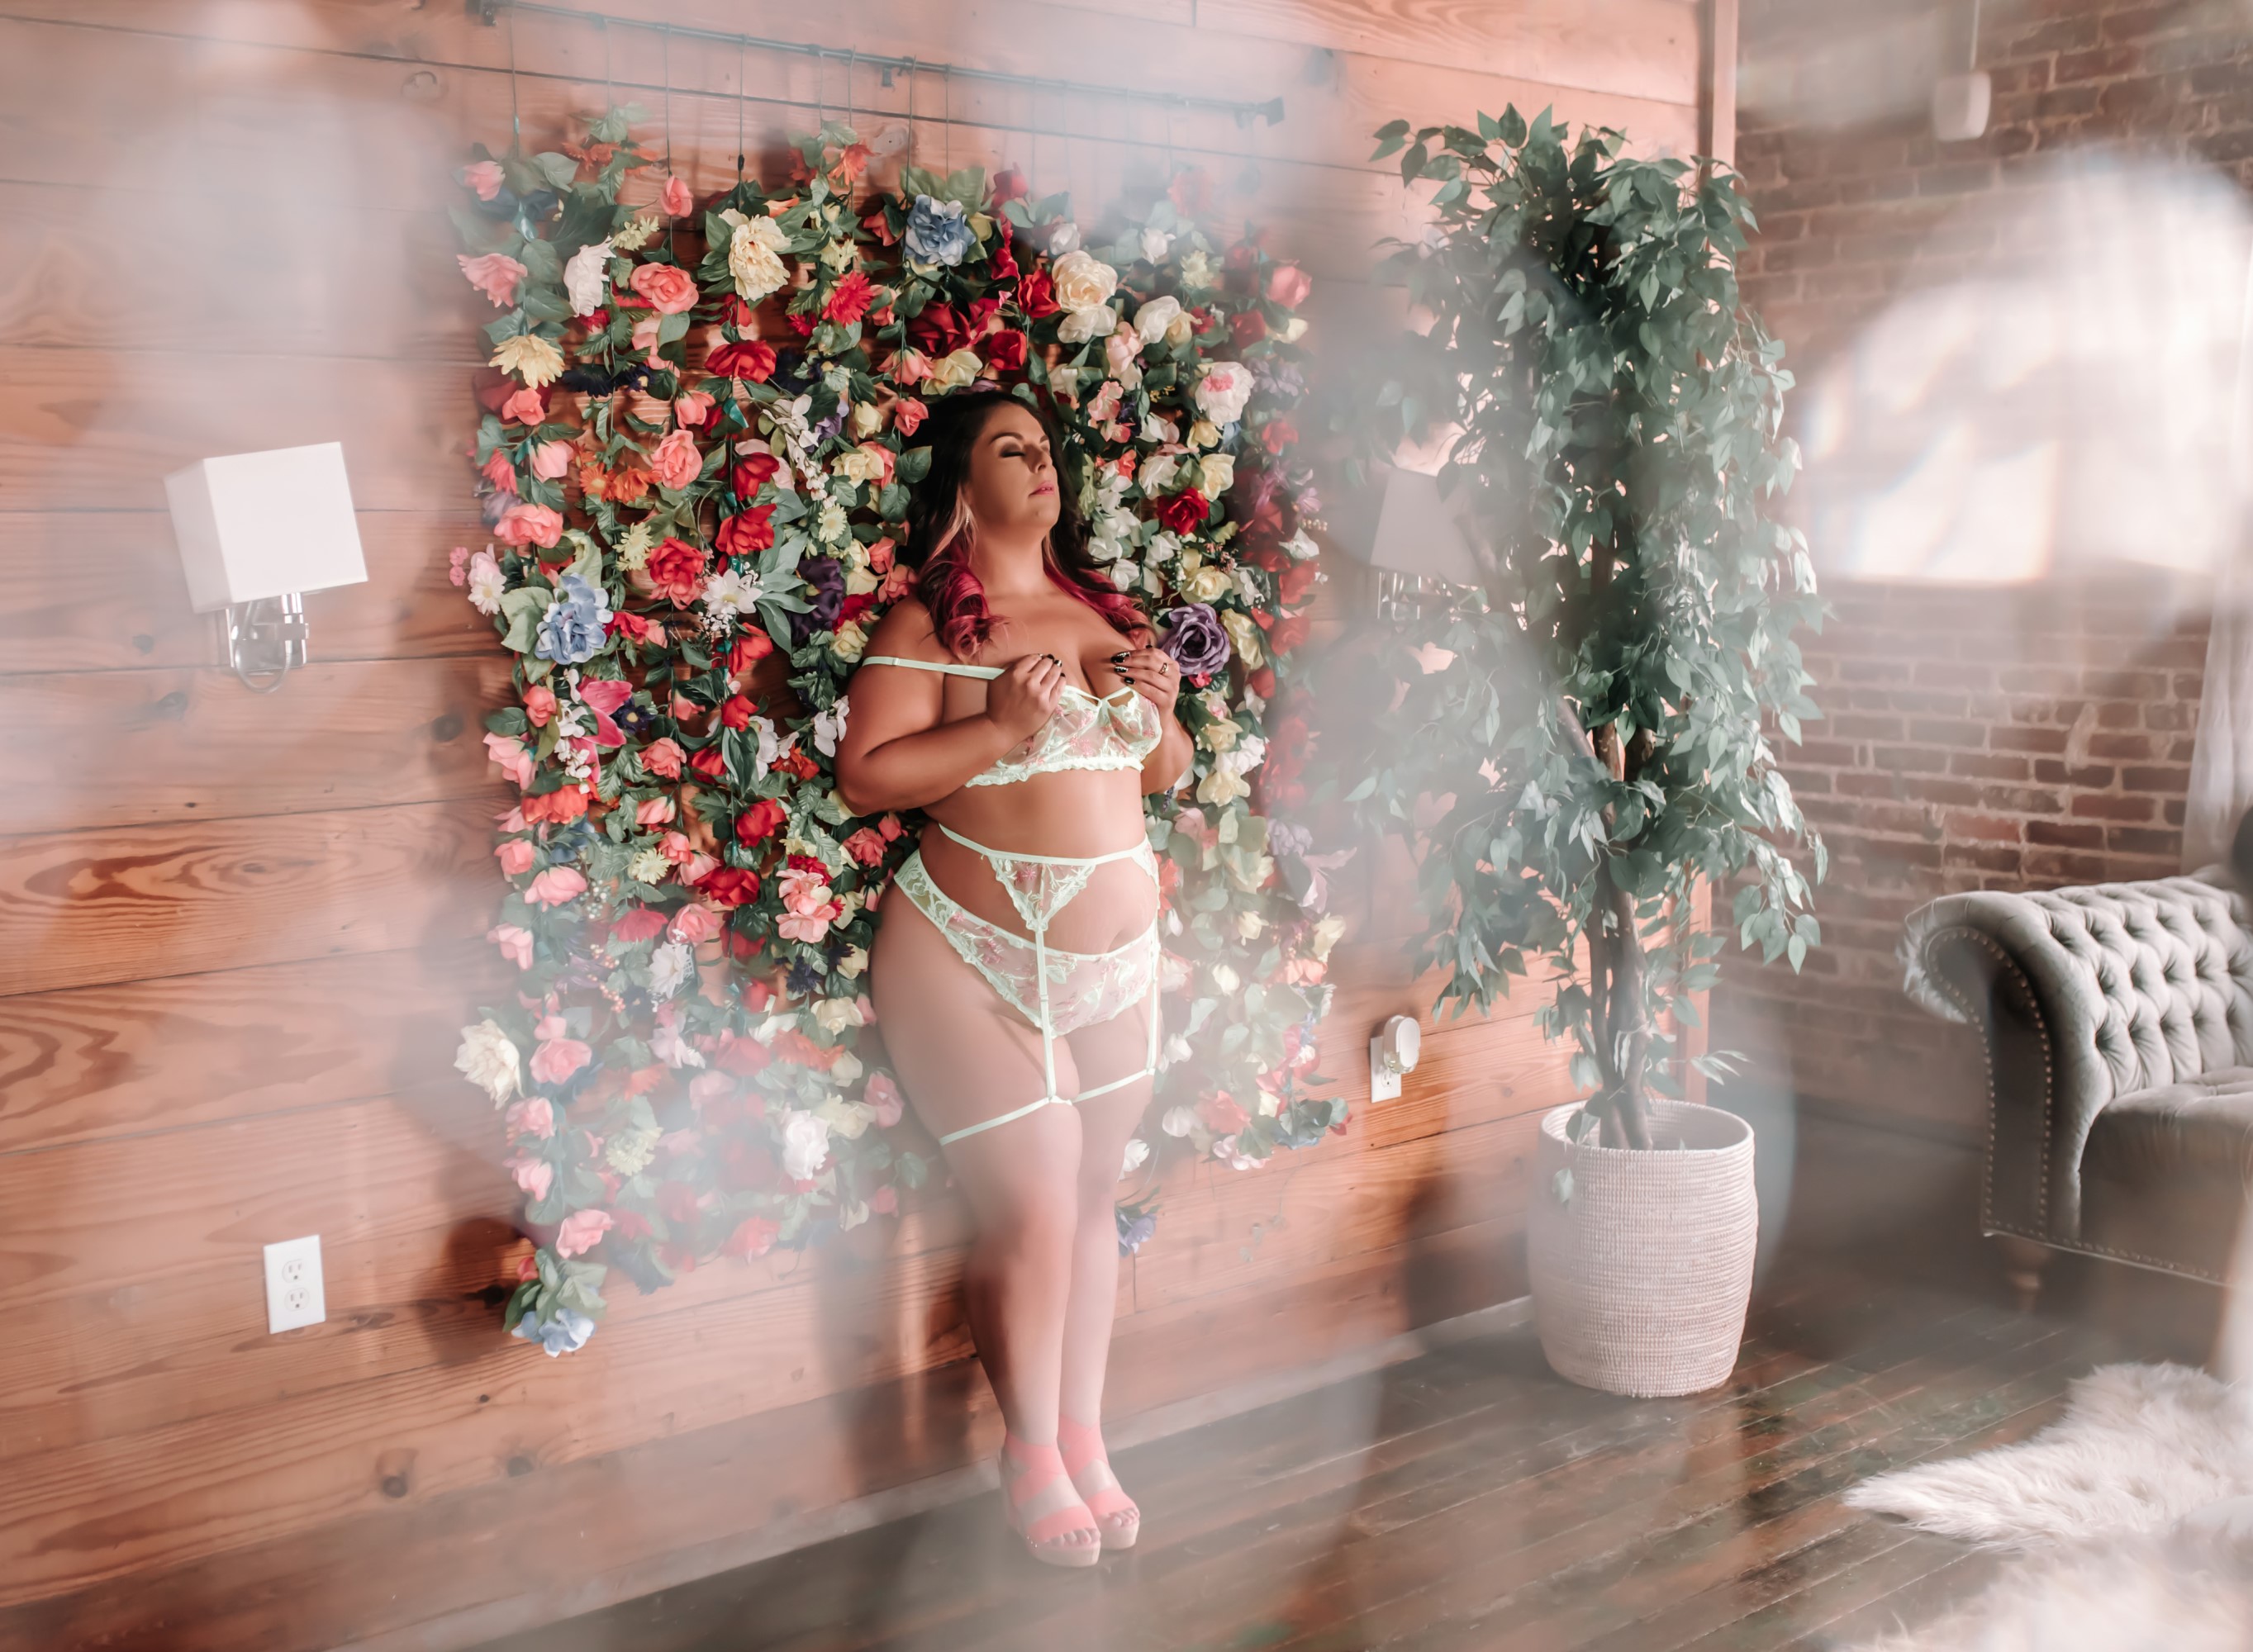 woman in green lingerie standing against flower wall